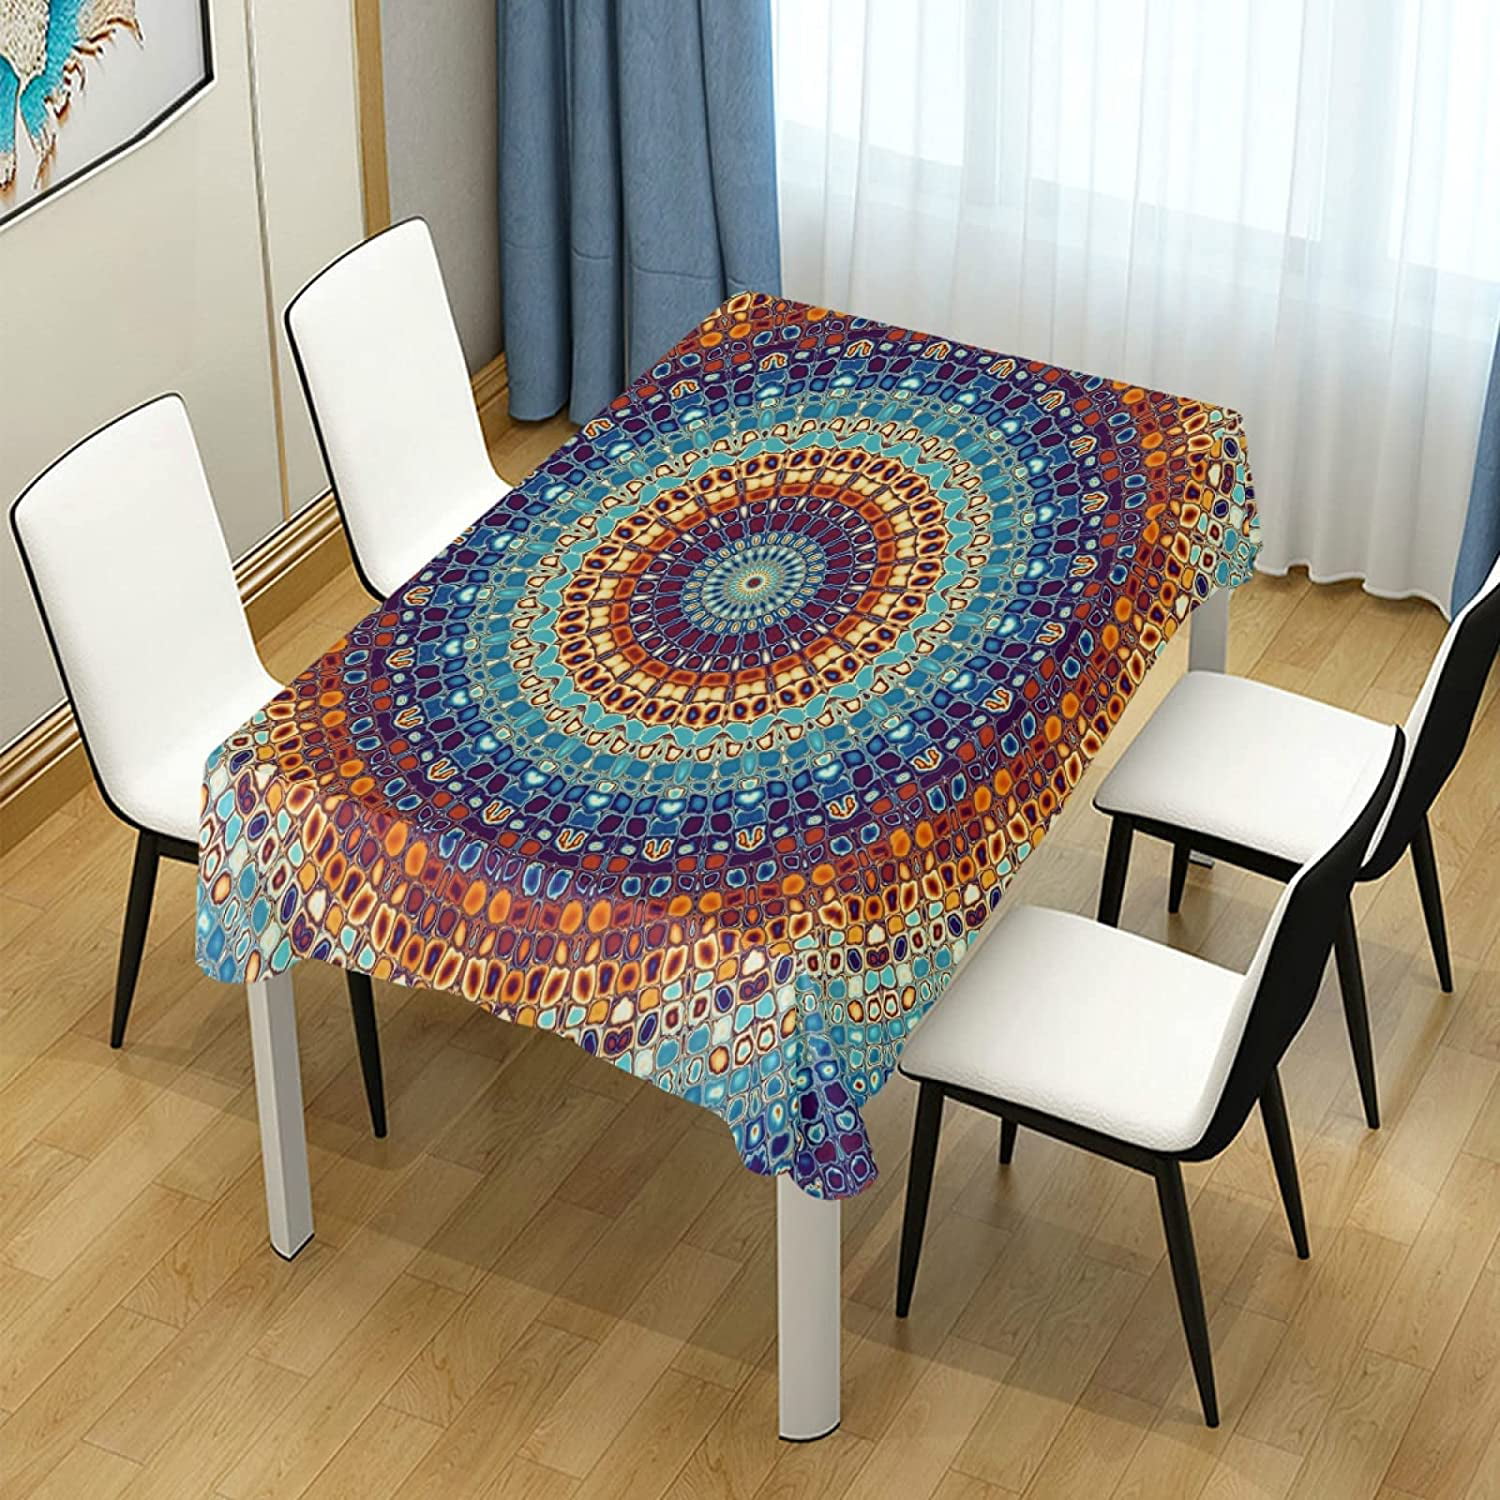 Waterproof Oil and Spill Proof Square Table Cloth for Dinning Table xigua Indian Motifs Mandala Pattern Rectangle Tablecloth 54 x 54 Buffet Table Wedding & More Holiday Parties